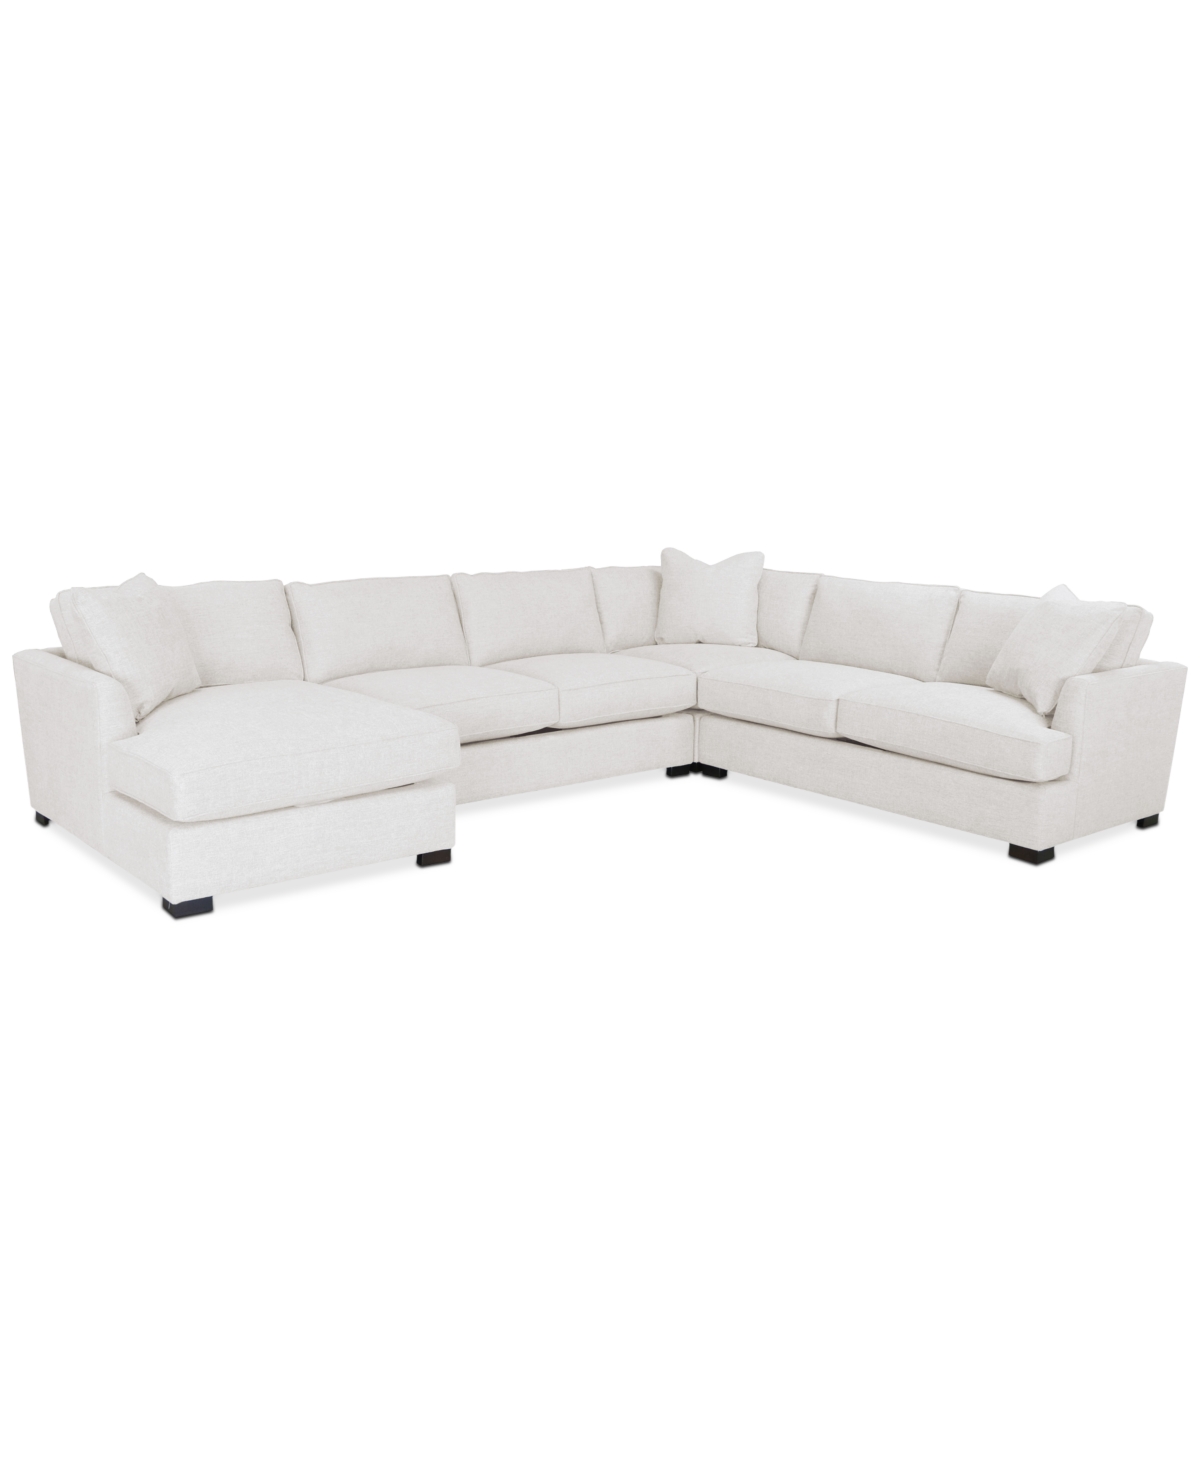 Furniture Nightford 148" 4-pc. Fabric Chaise Sectional, Created For Macy's In Dove